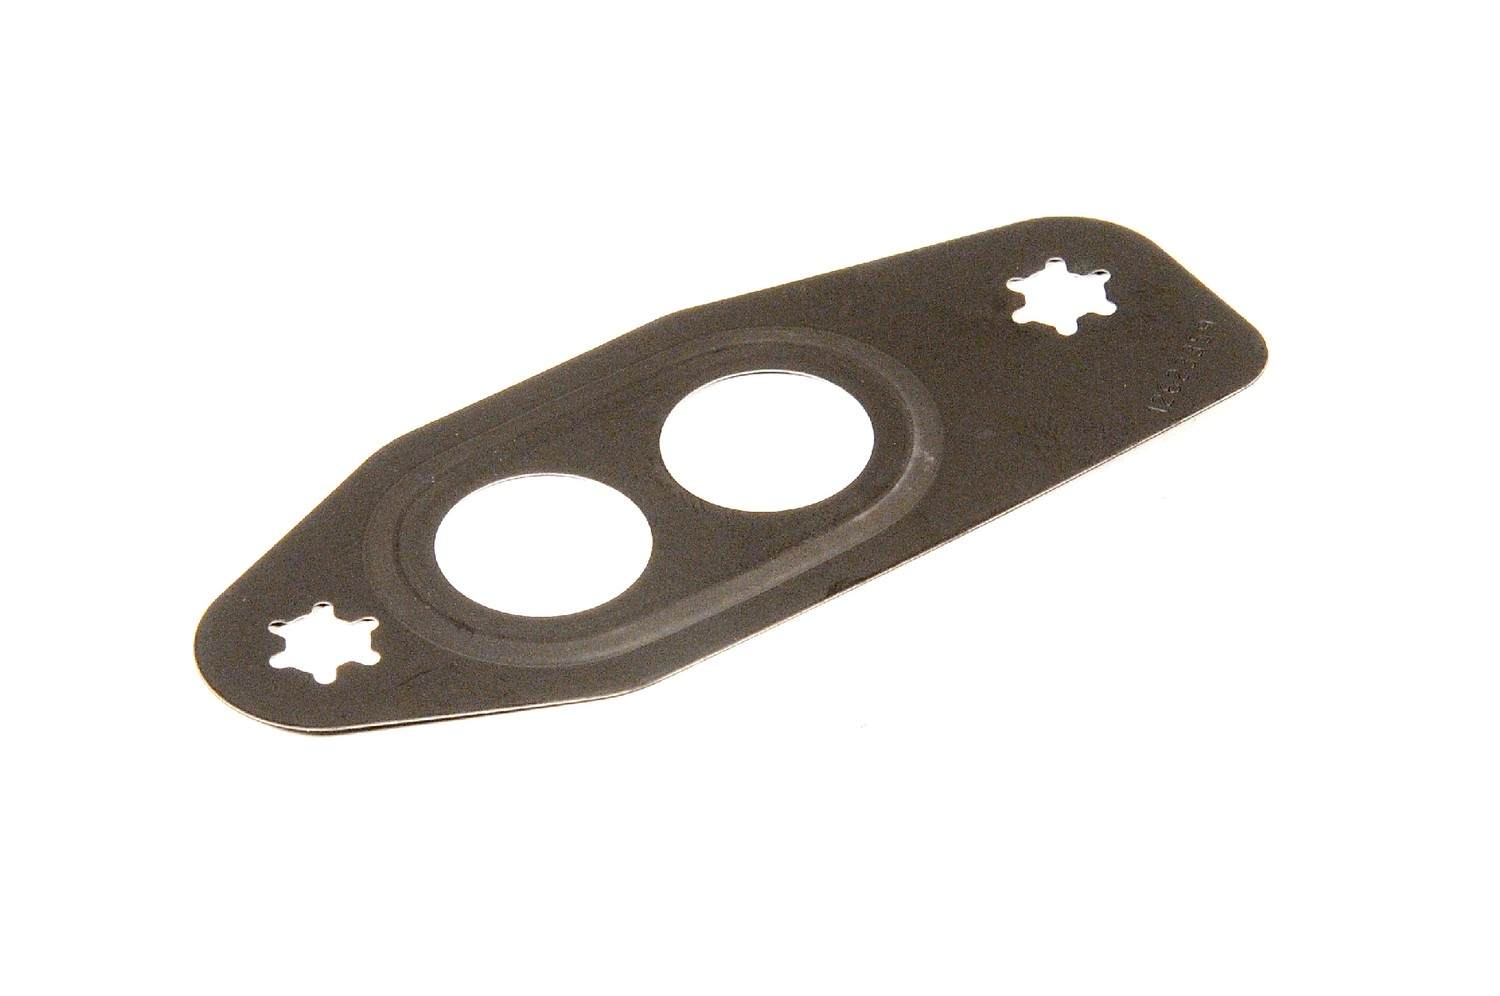 GM GENUINE PARTS CANADA - Engine Oil Pan Cover Gasket - GMC 12623359